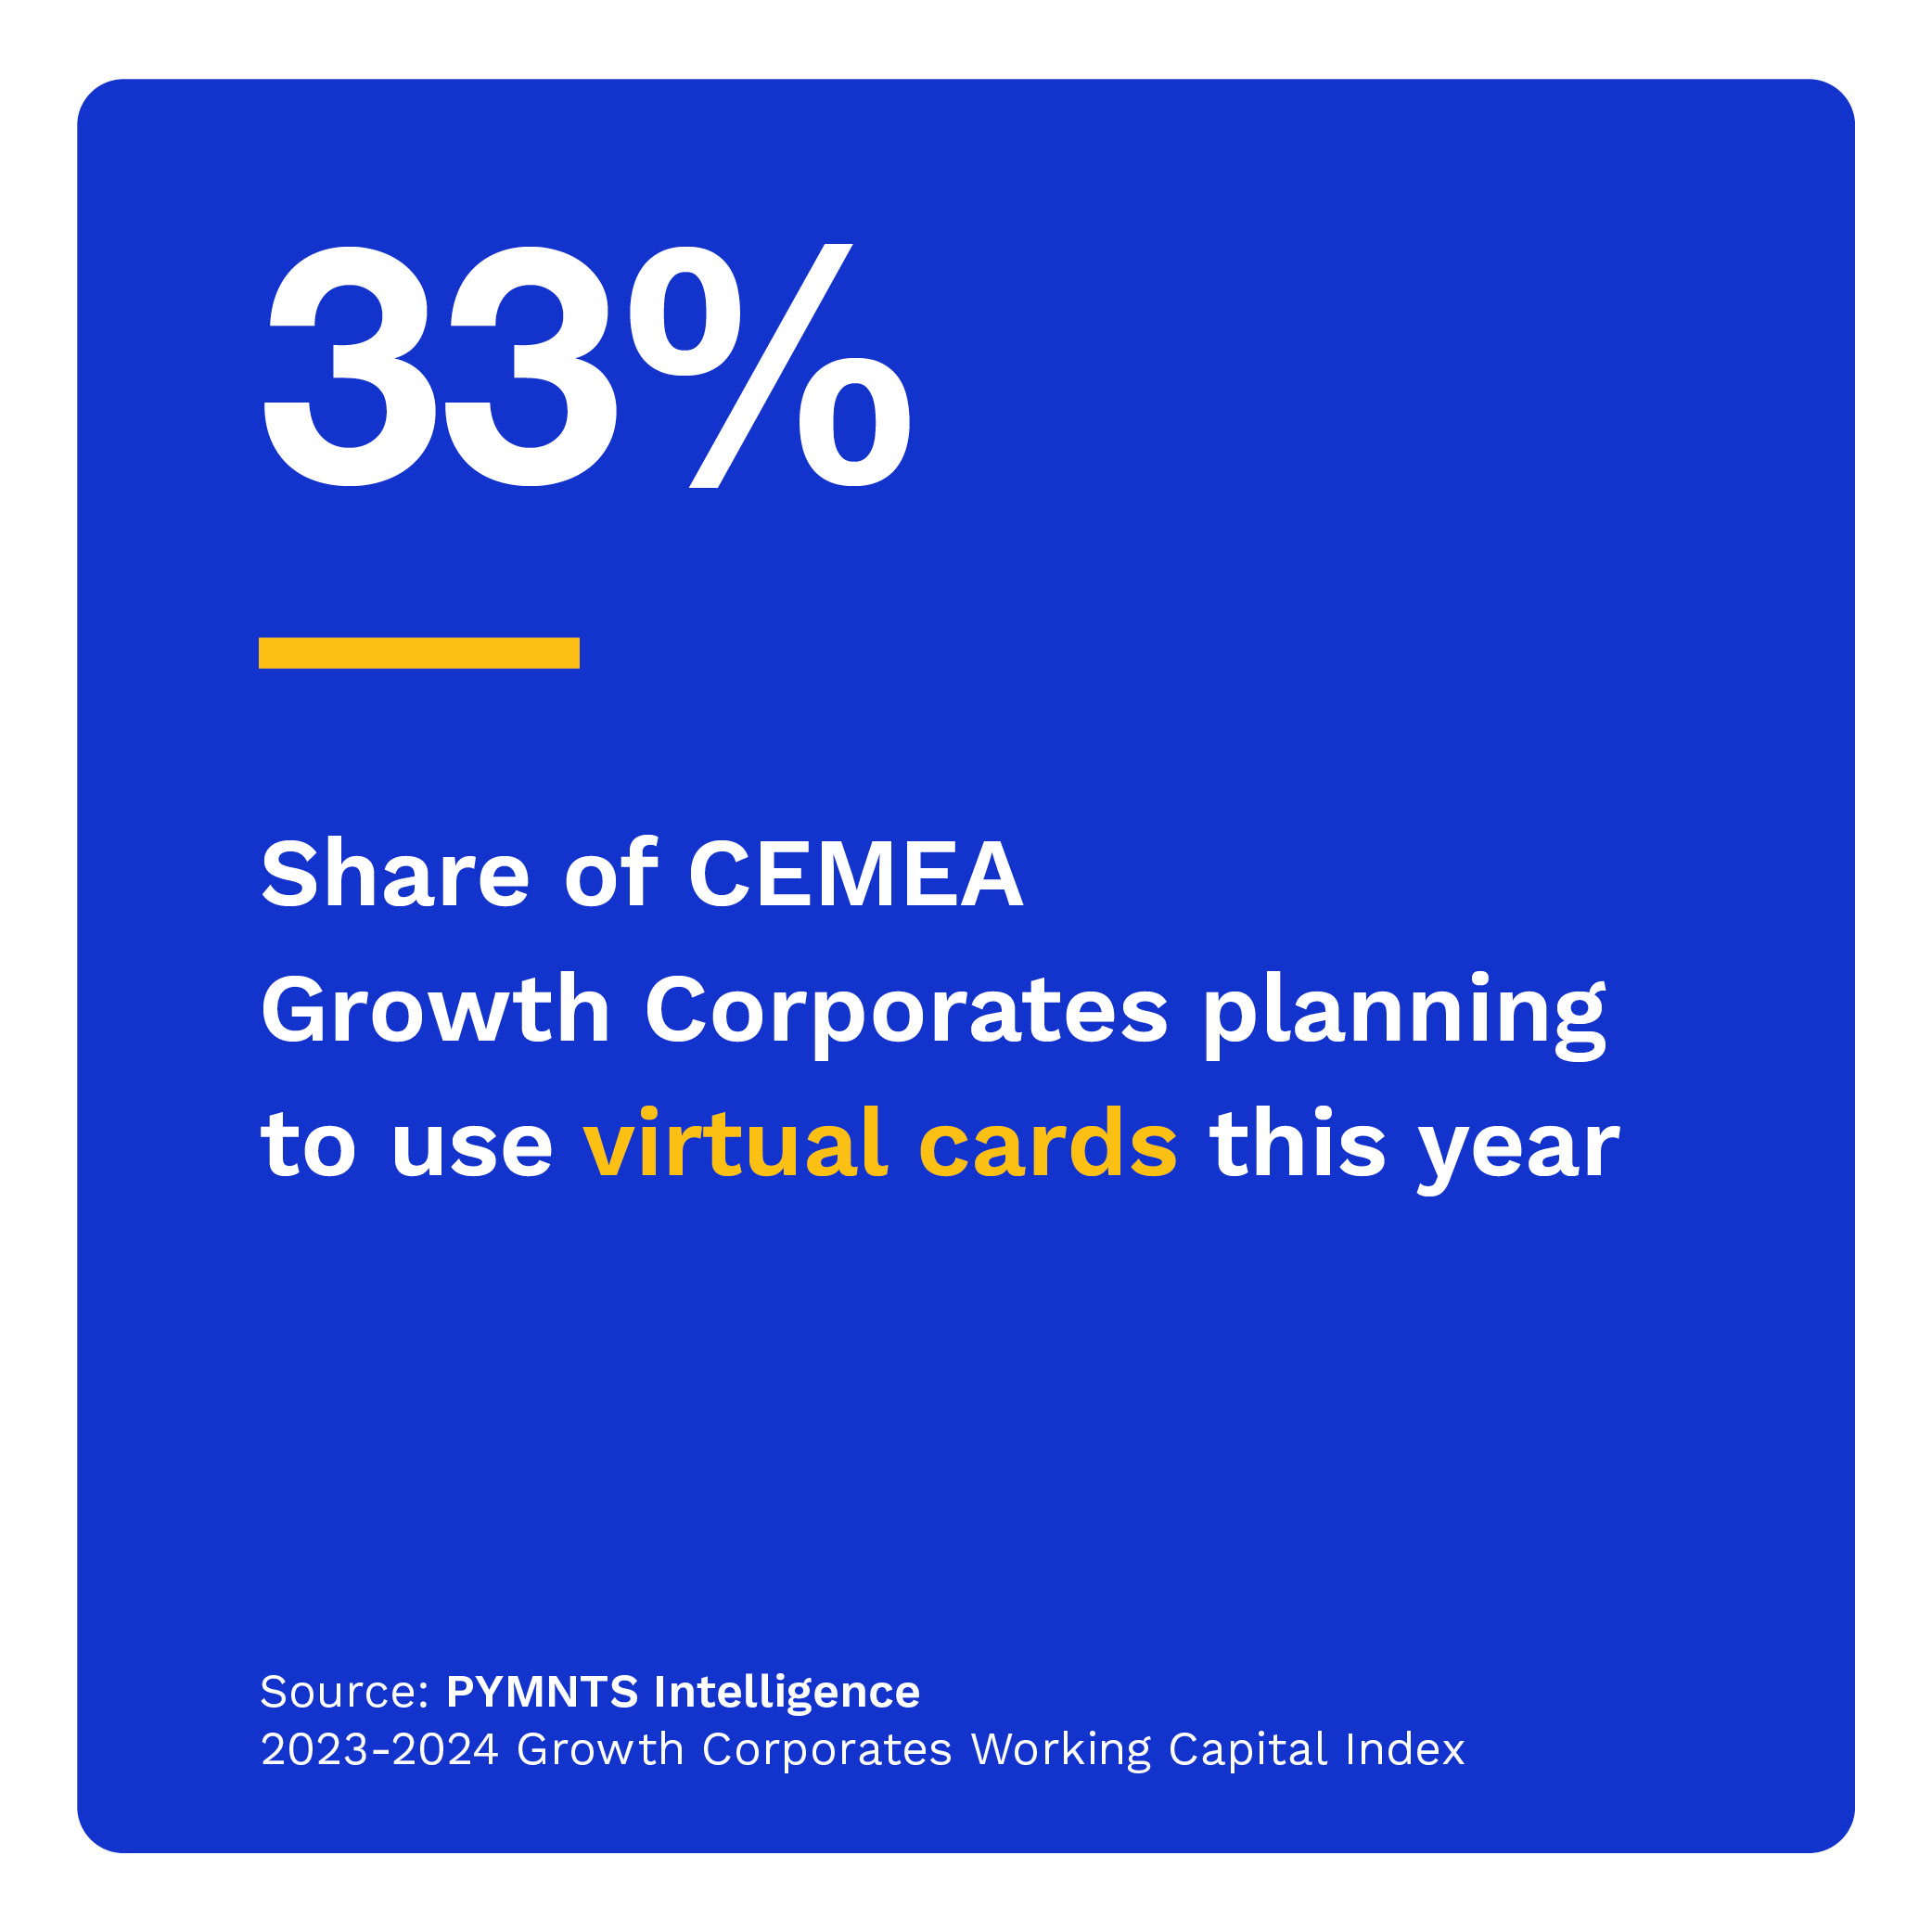 33%: Share of CEMEA Growth Corporates planning to use virtual cards this year